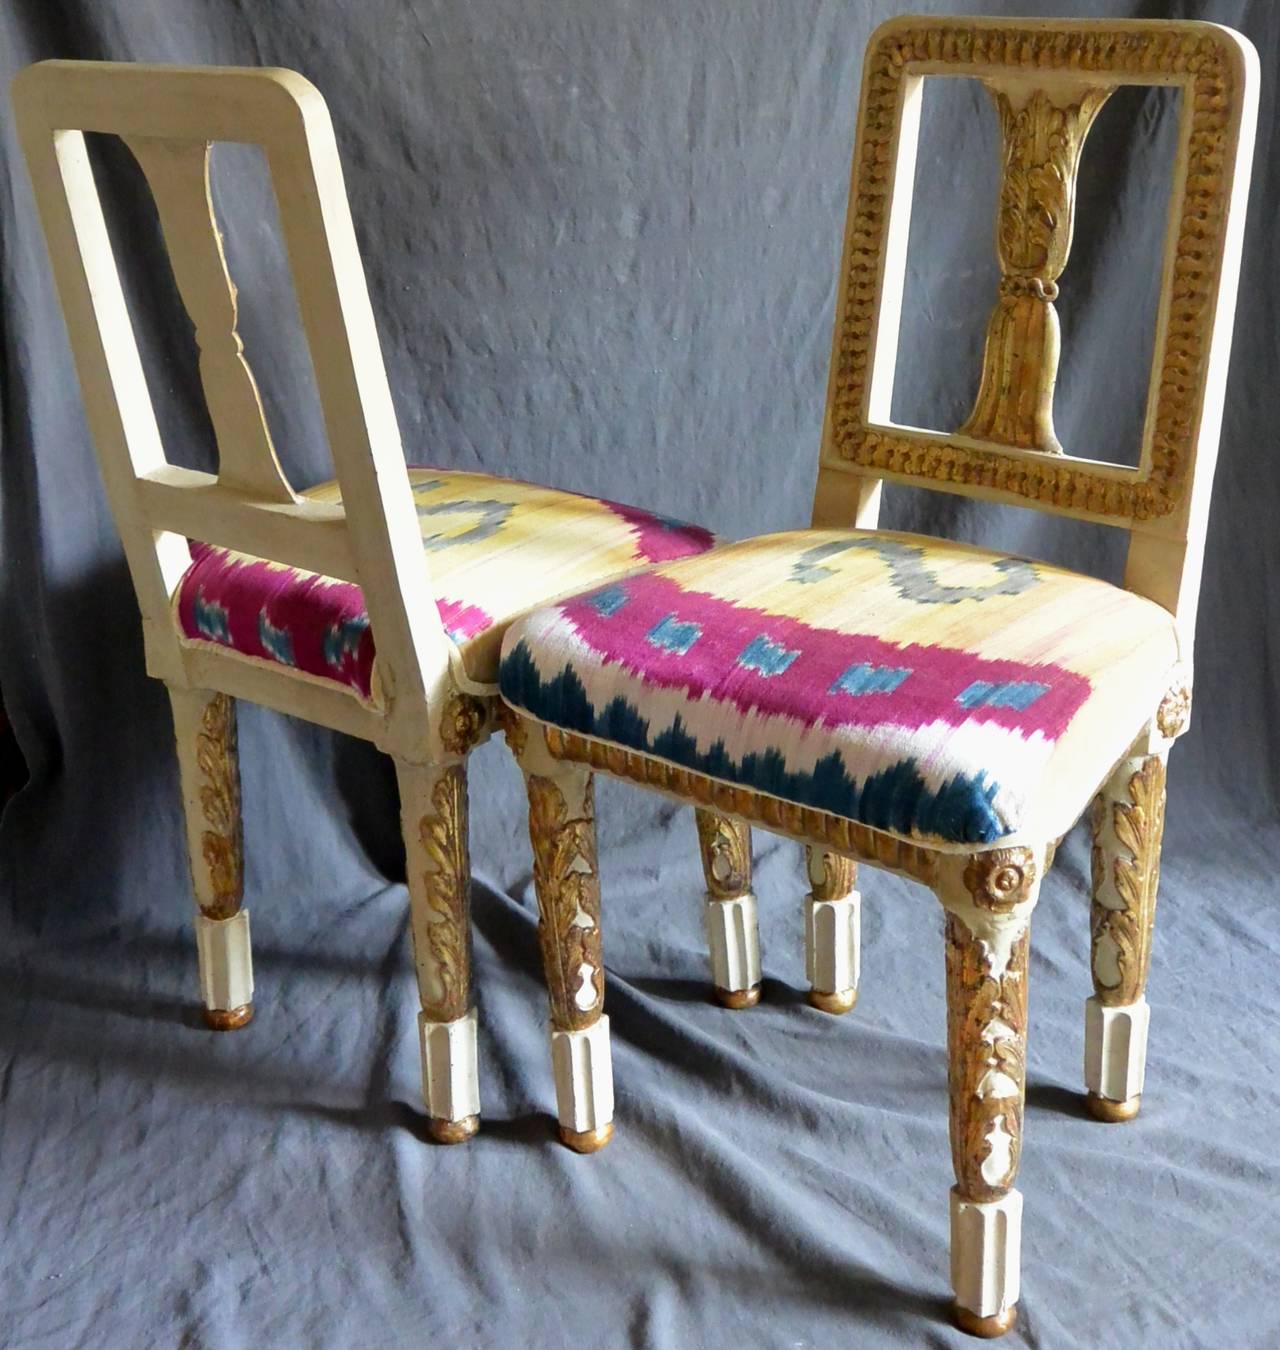 Pair of antique painted and giltwood Neapolitan hall chairs in original painted condition. Newly re-upholstered with silk velvet and applied antique silk Ikat. Painting and gilding newly re-freshed.
Dimension: 35.5